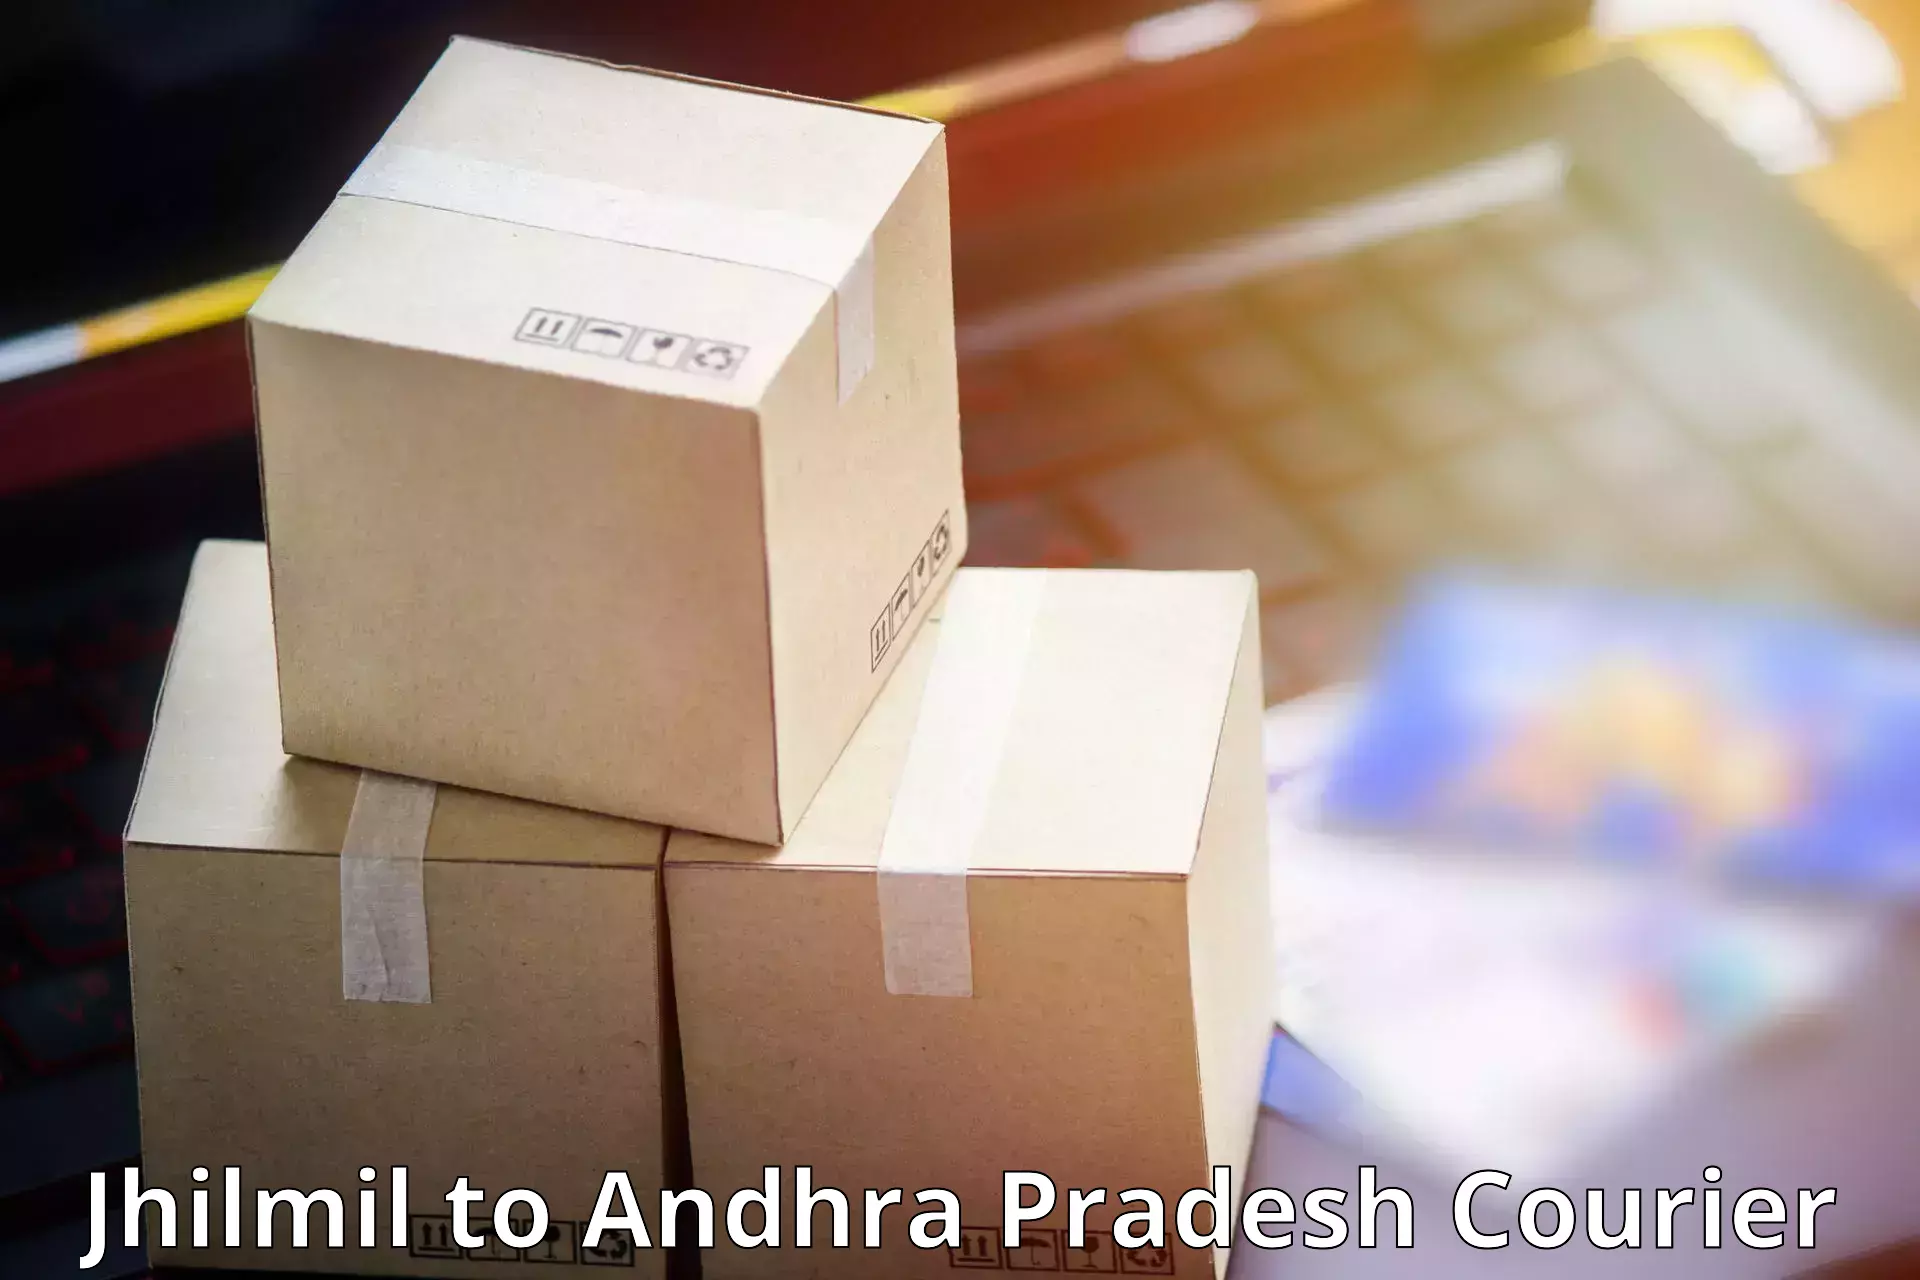 Business courier solutions Jhilmil to Bapatla